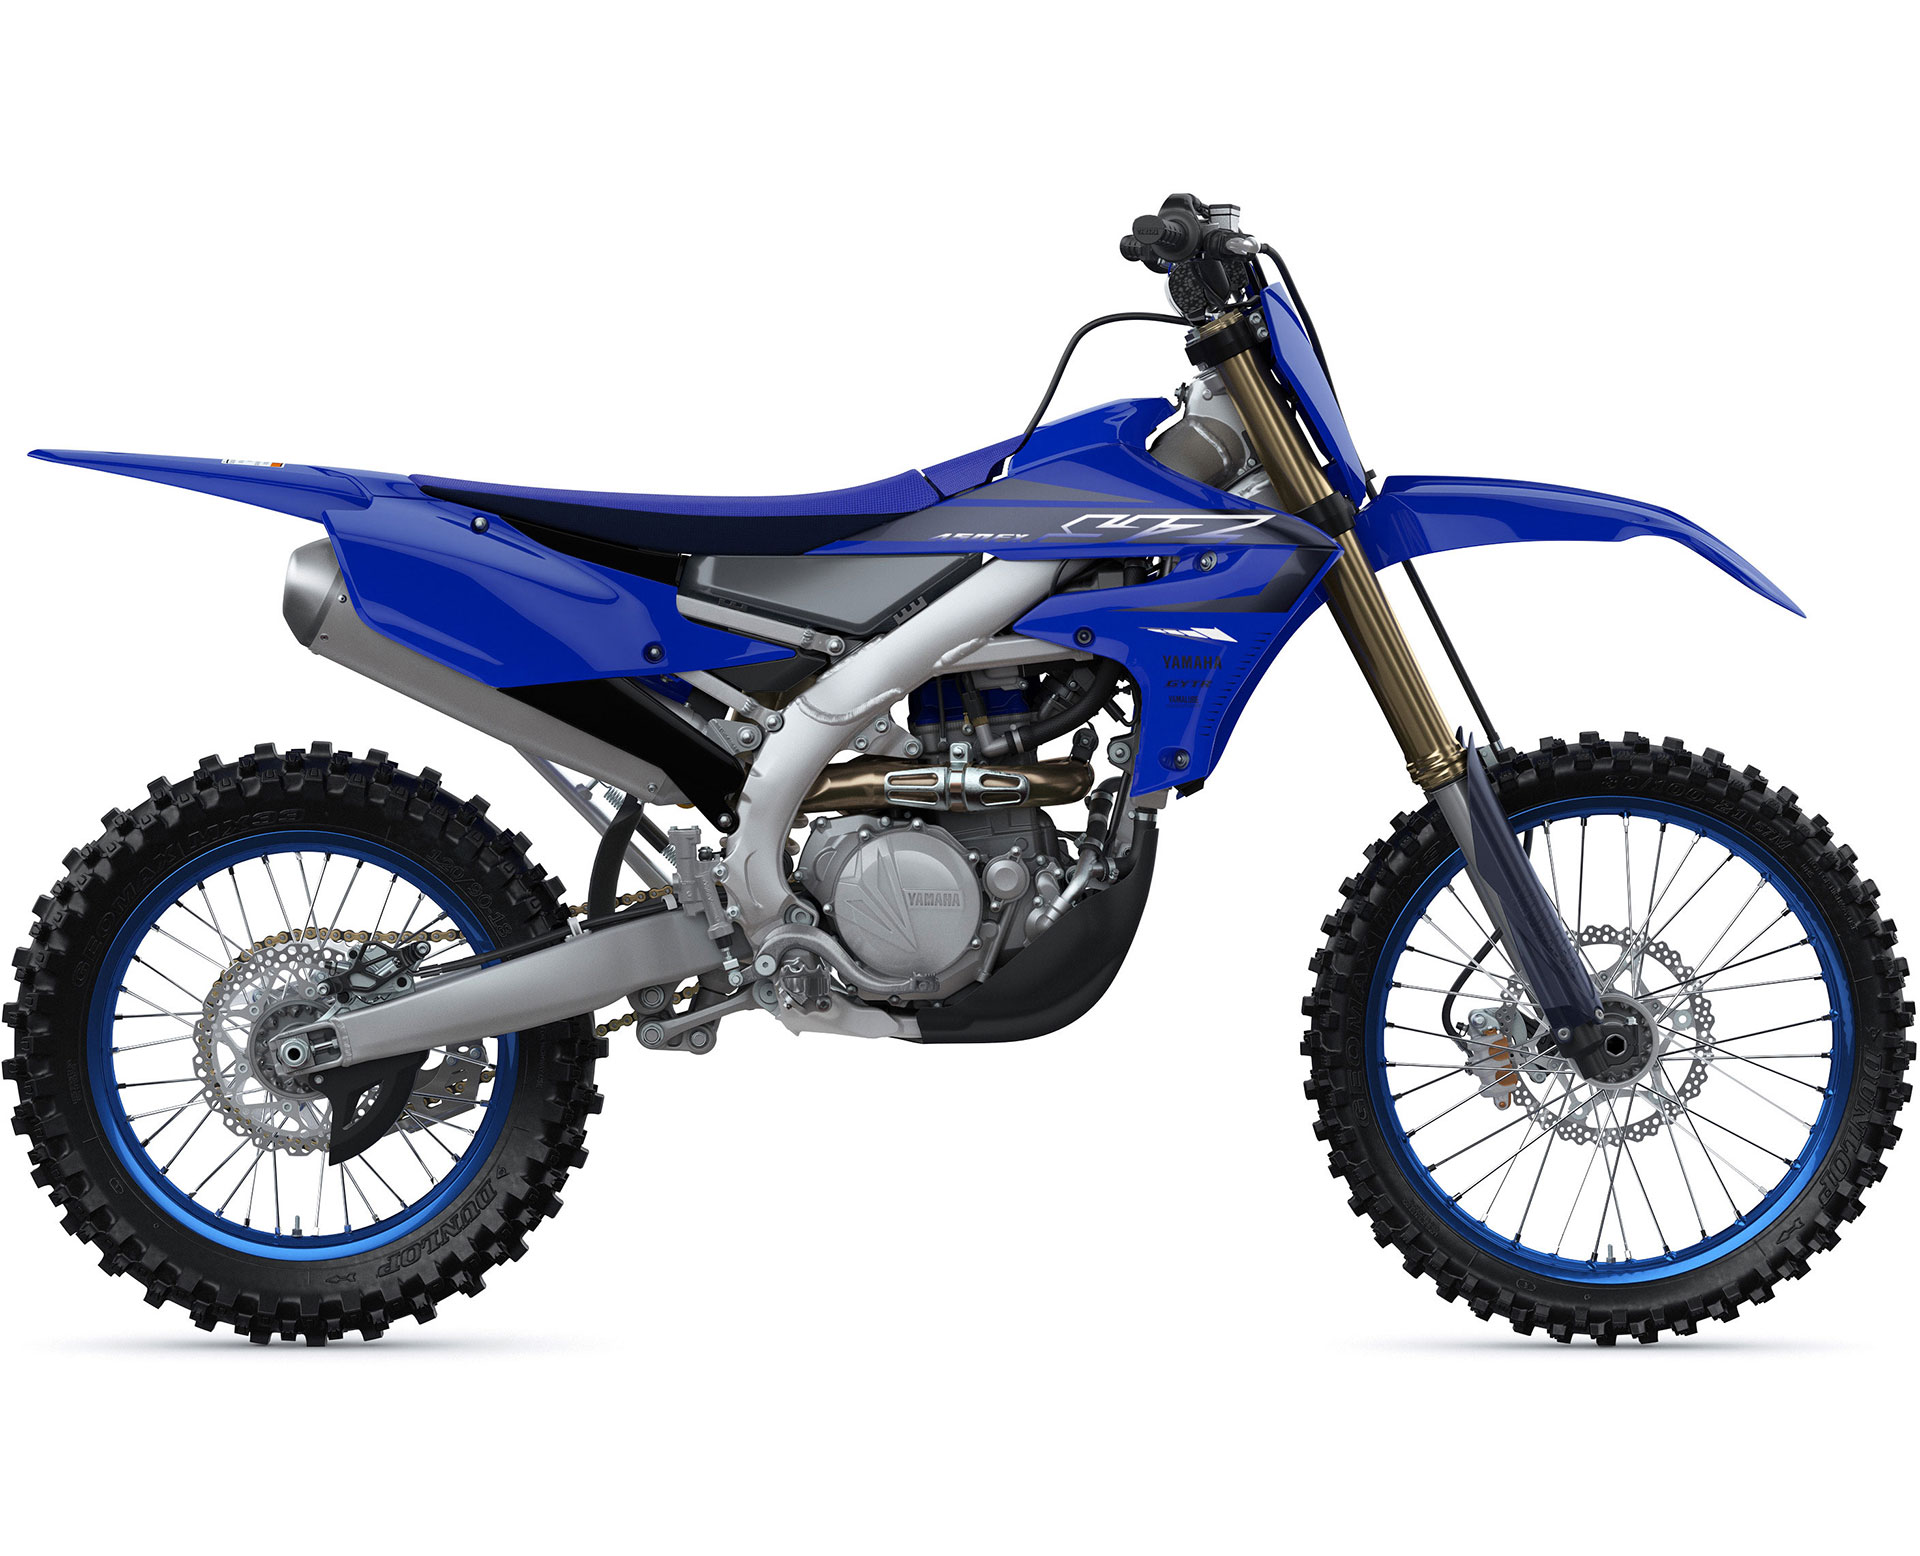 Thumbnail of your customized YZ450FX 2023